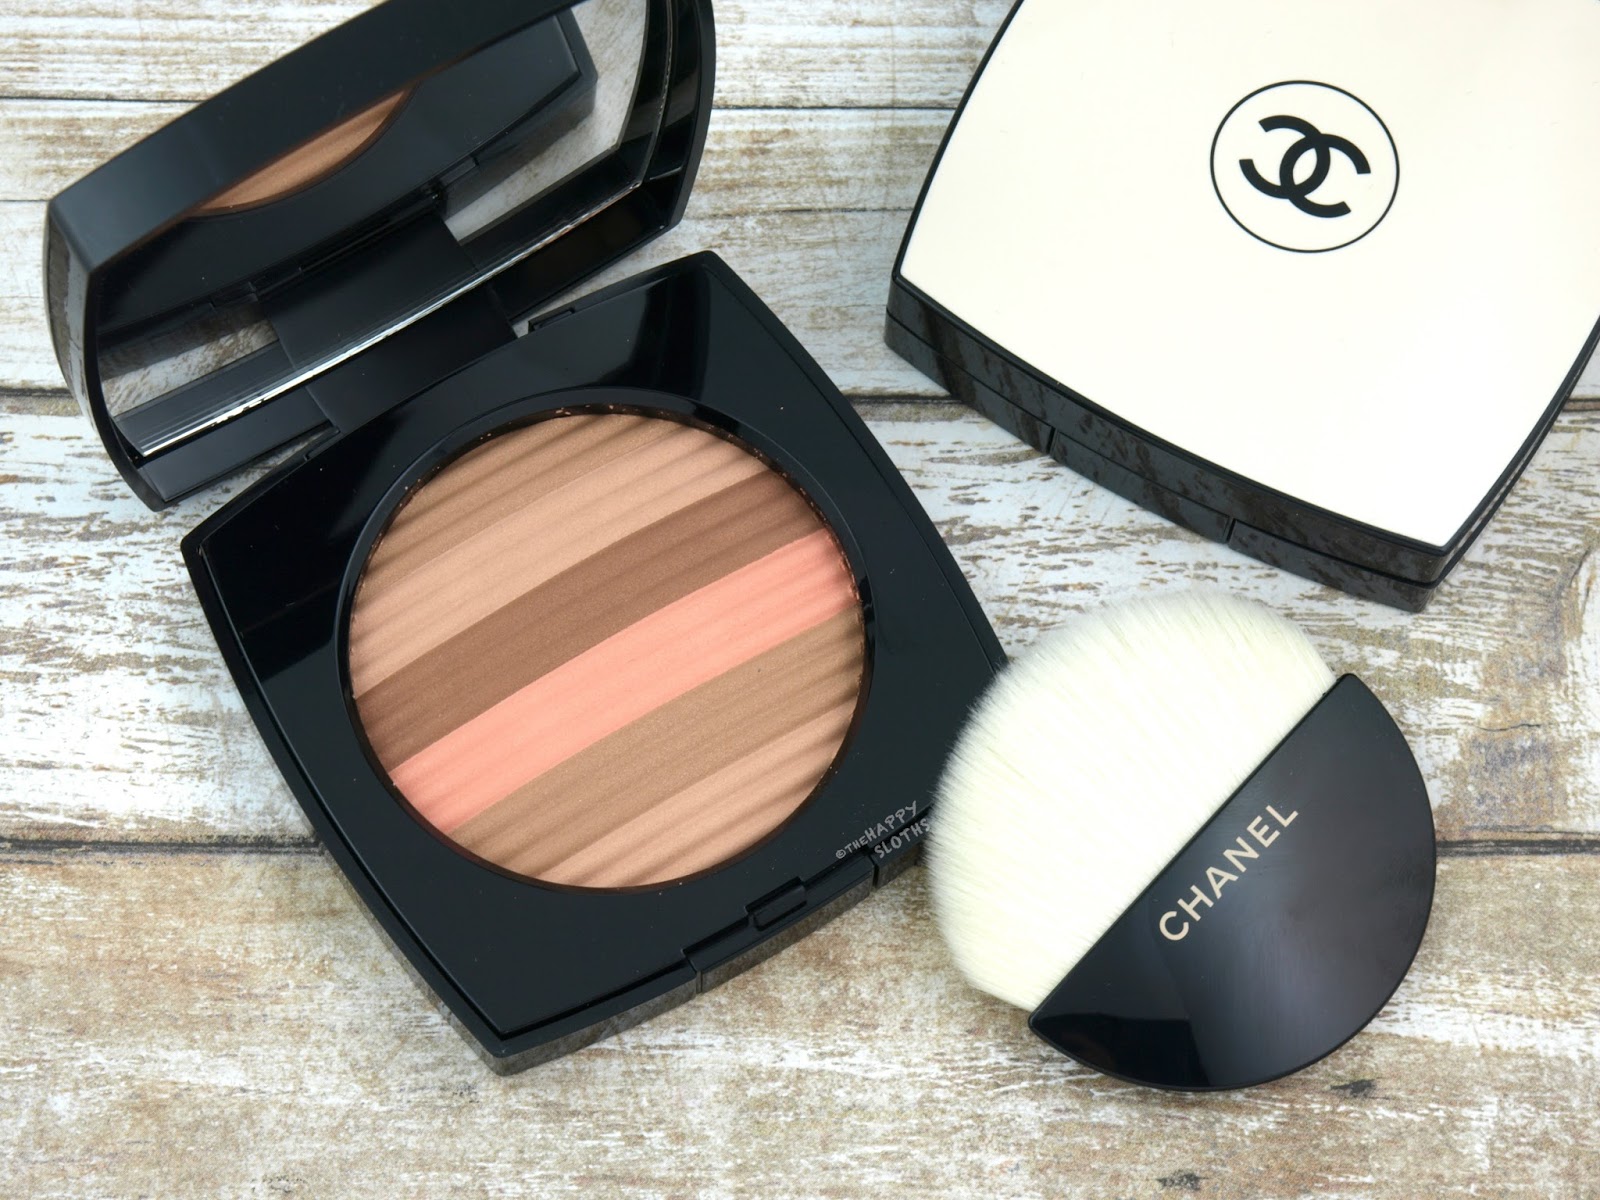 Chanel Les Beiges 2018 Collection: Review and Swatches  The Happy Sloths:  Beauty, Makeup, and Skincare Blog with Reviews and Swatches